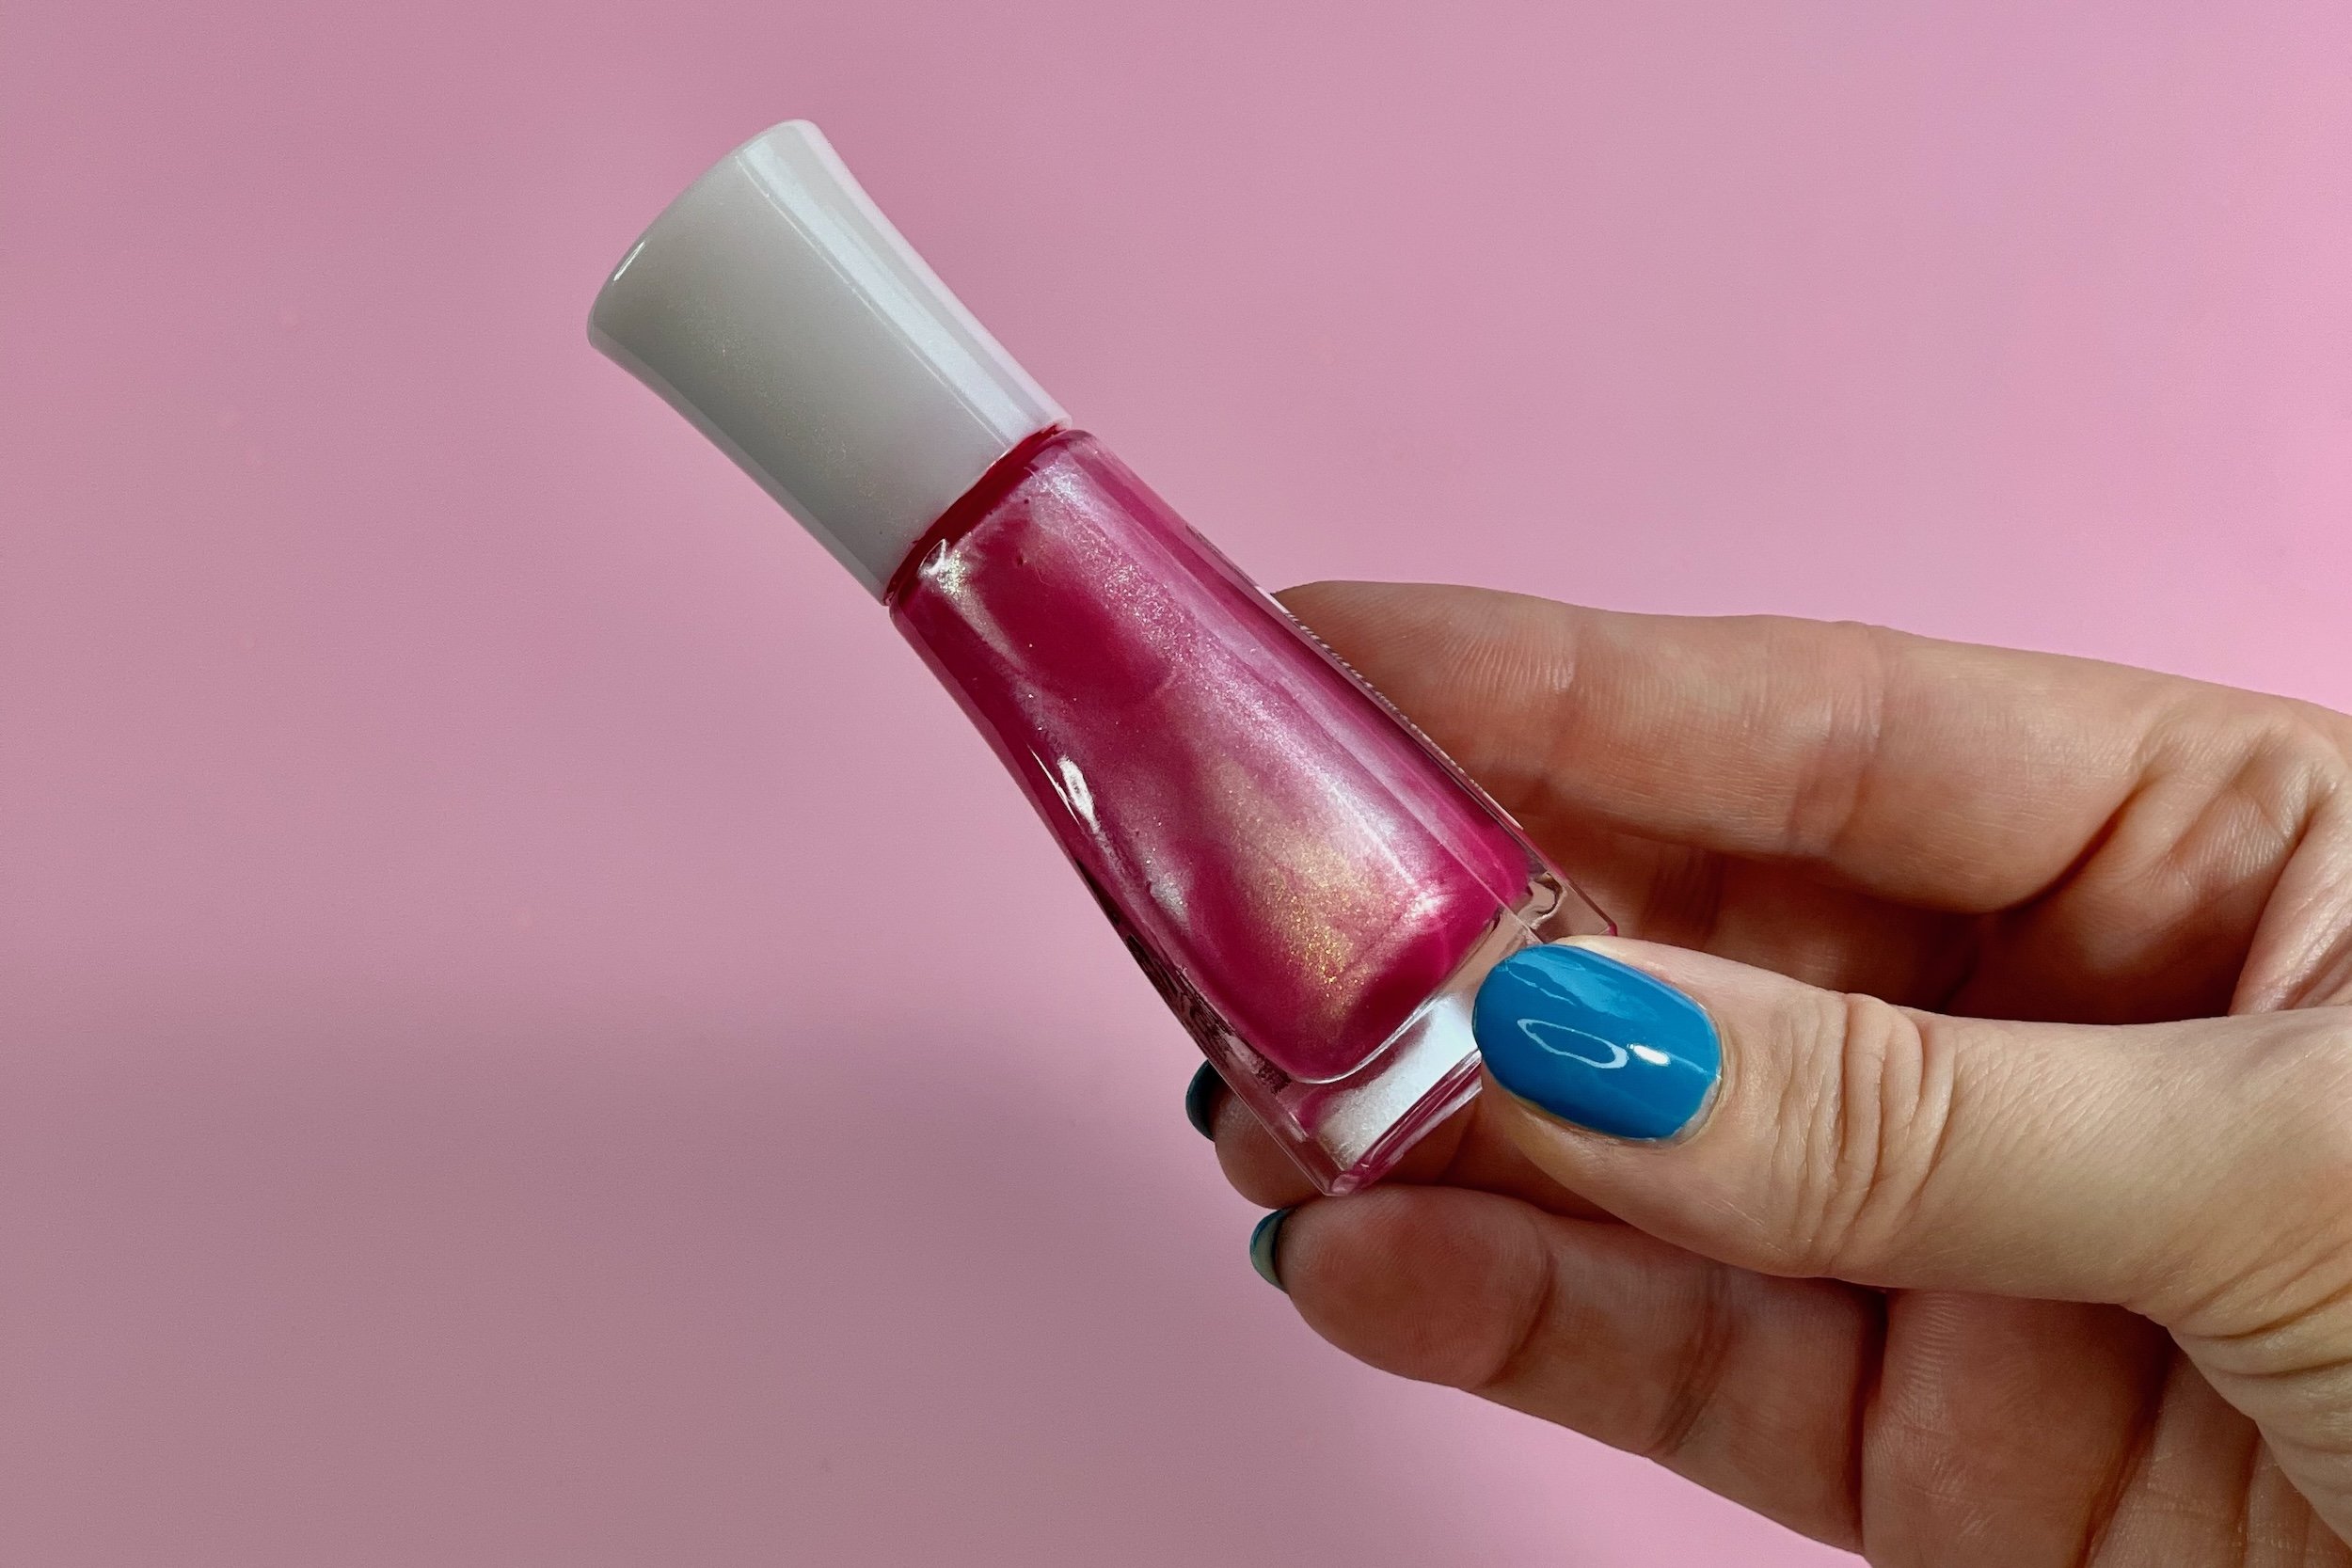 Make your own glitter nail polish at home in under 5 minutes